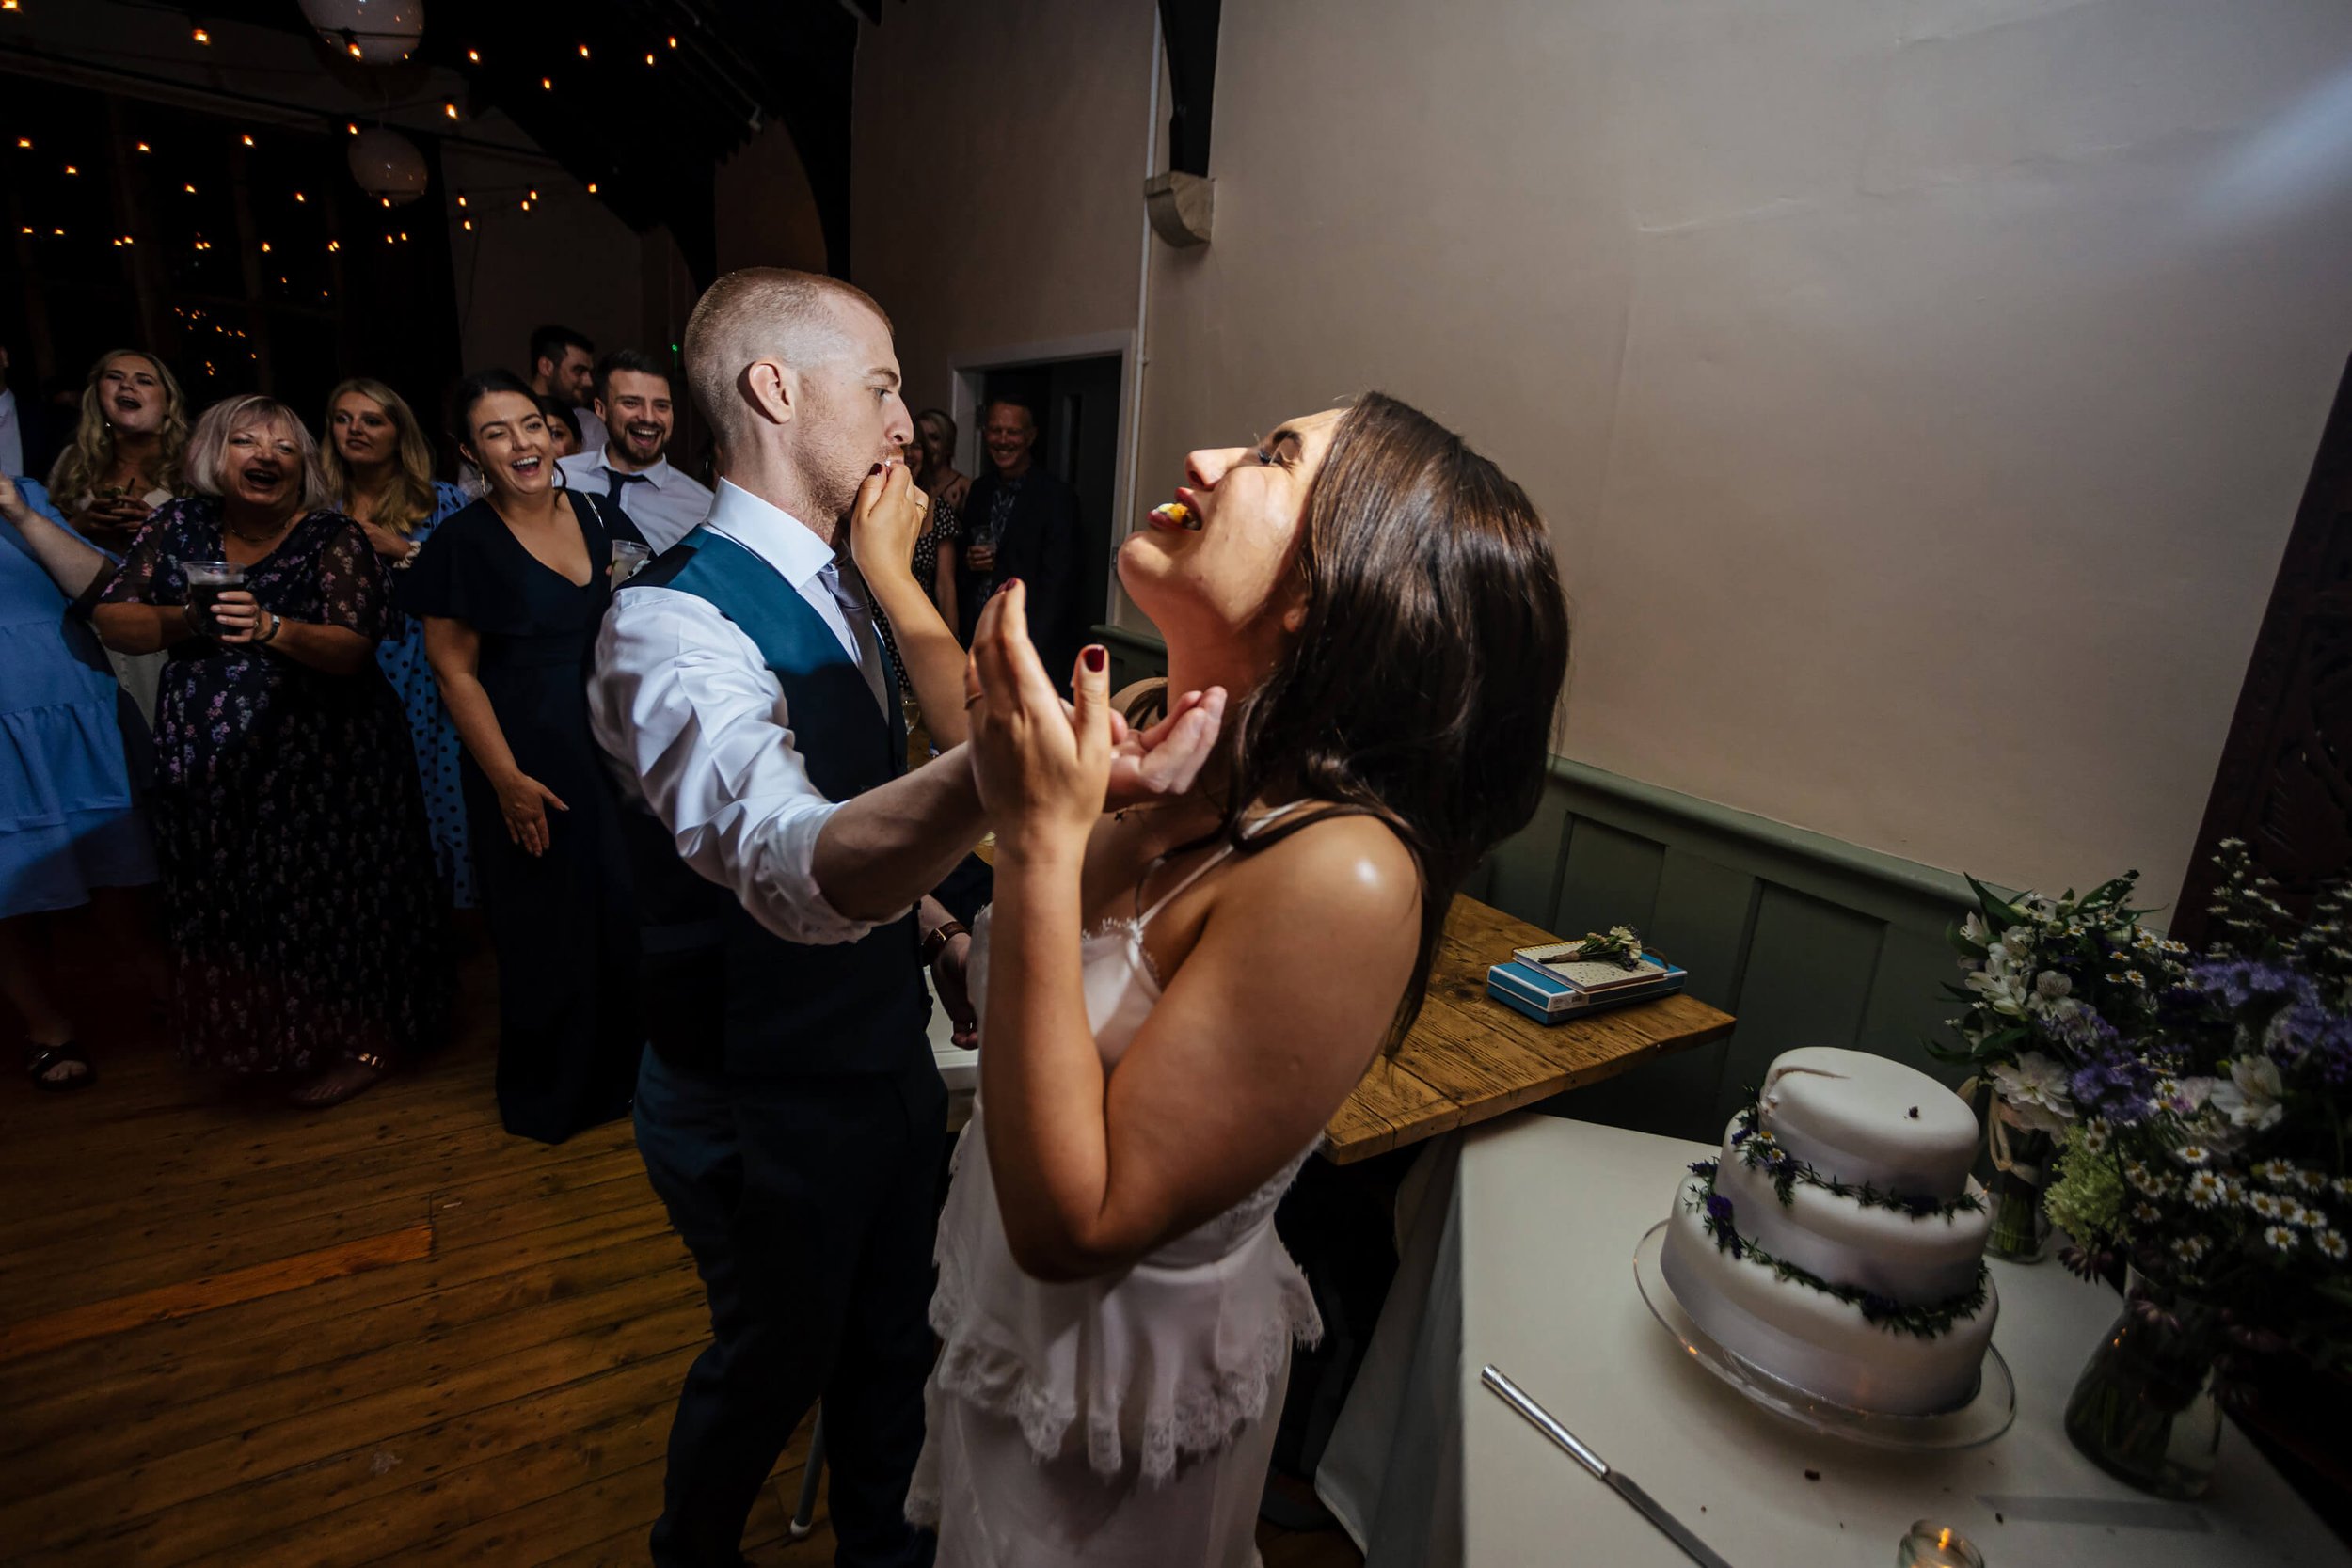 Bride and groom stuffing wedding cake into each others mouths